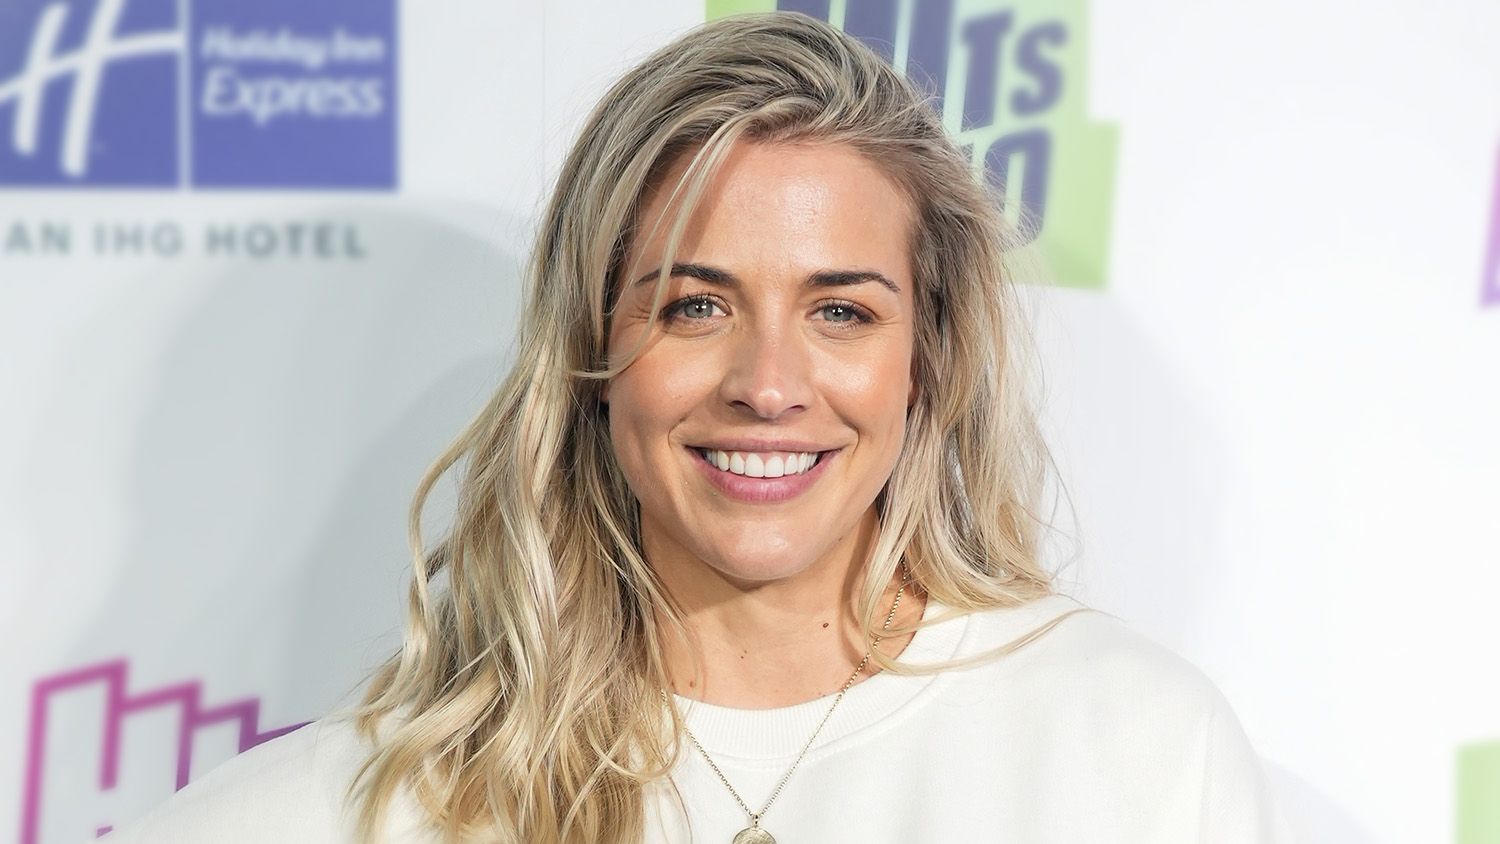 Gemma Atkinson's career: A timeline of her biggest achievements so far